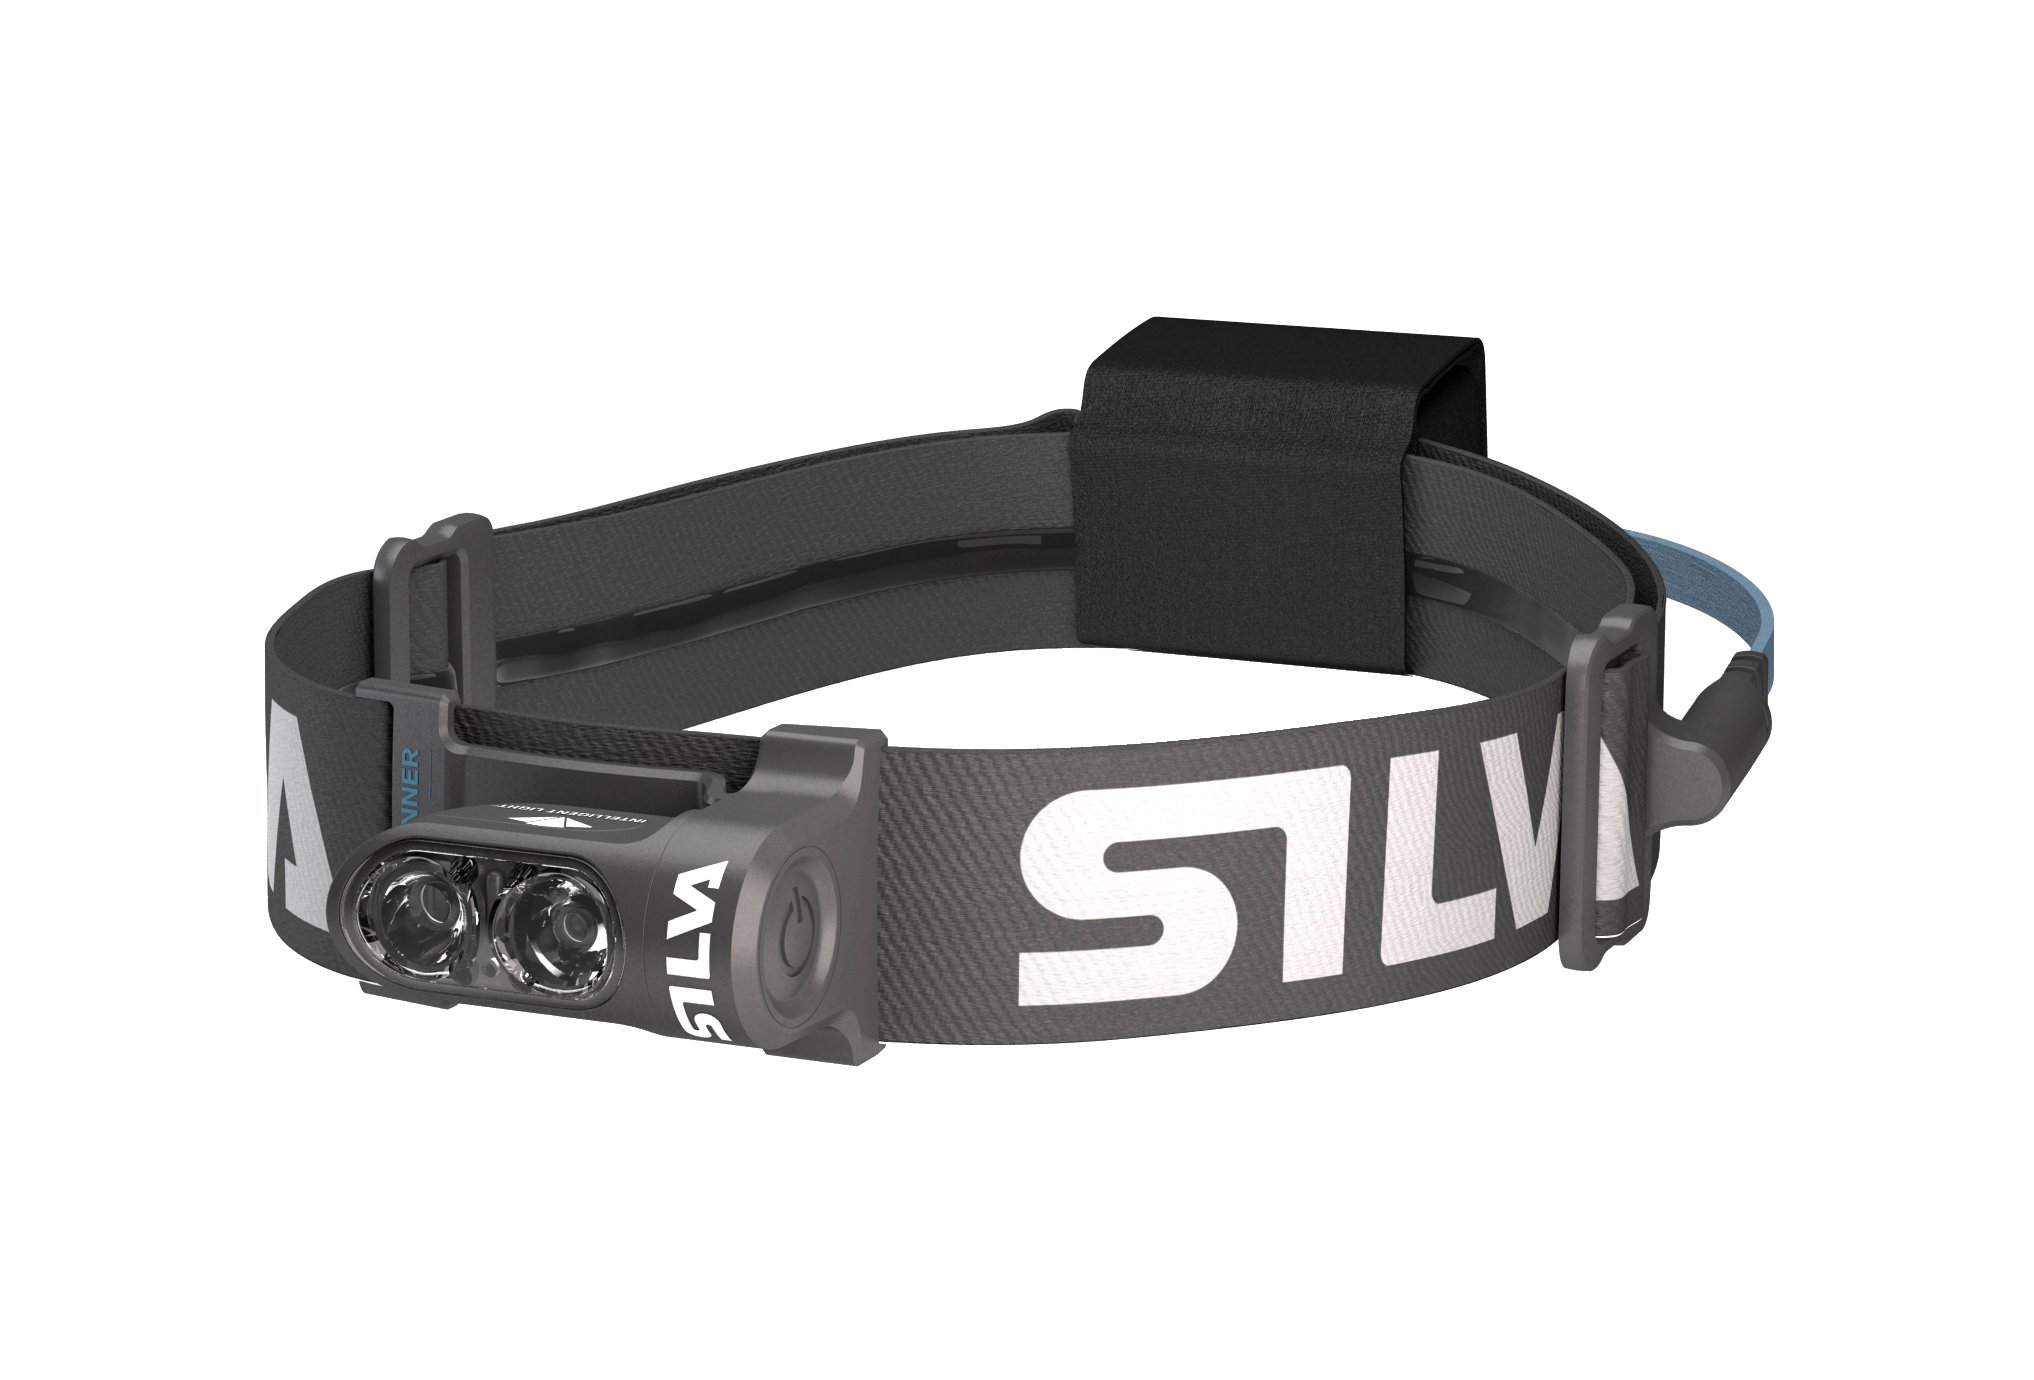 Silva Trail Runner Free Ultra Lampe frontale / éclairage